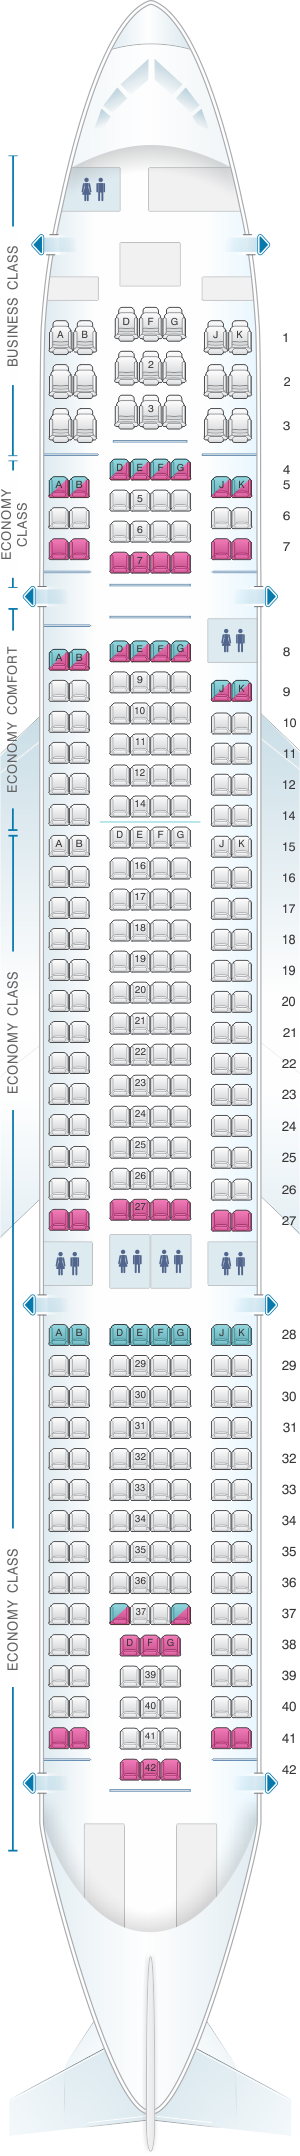 Seat map for Eurowings Airbus A330 200